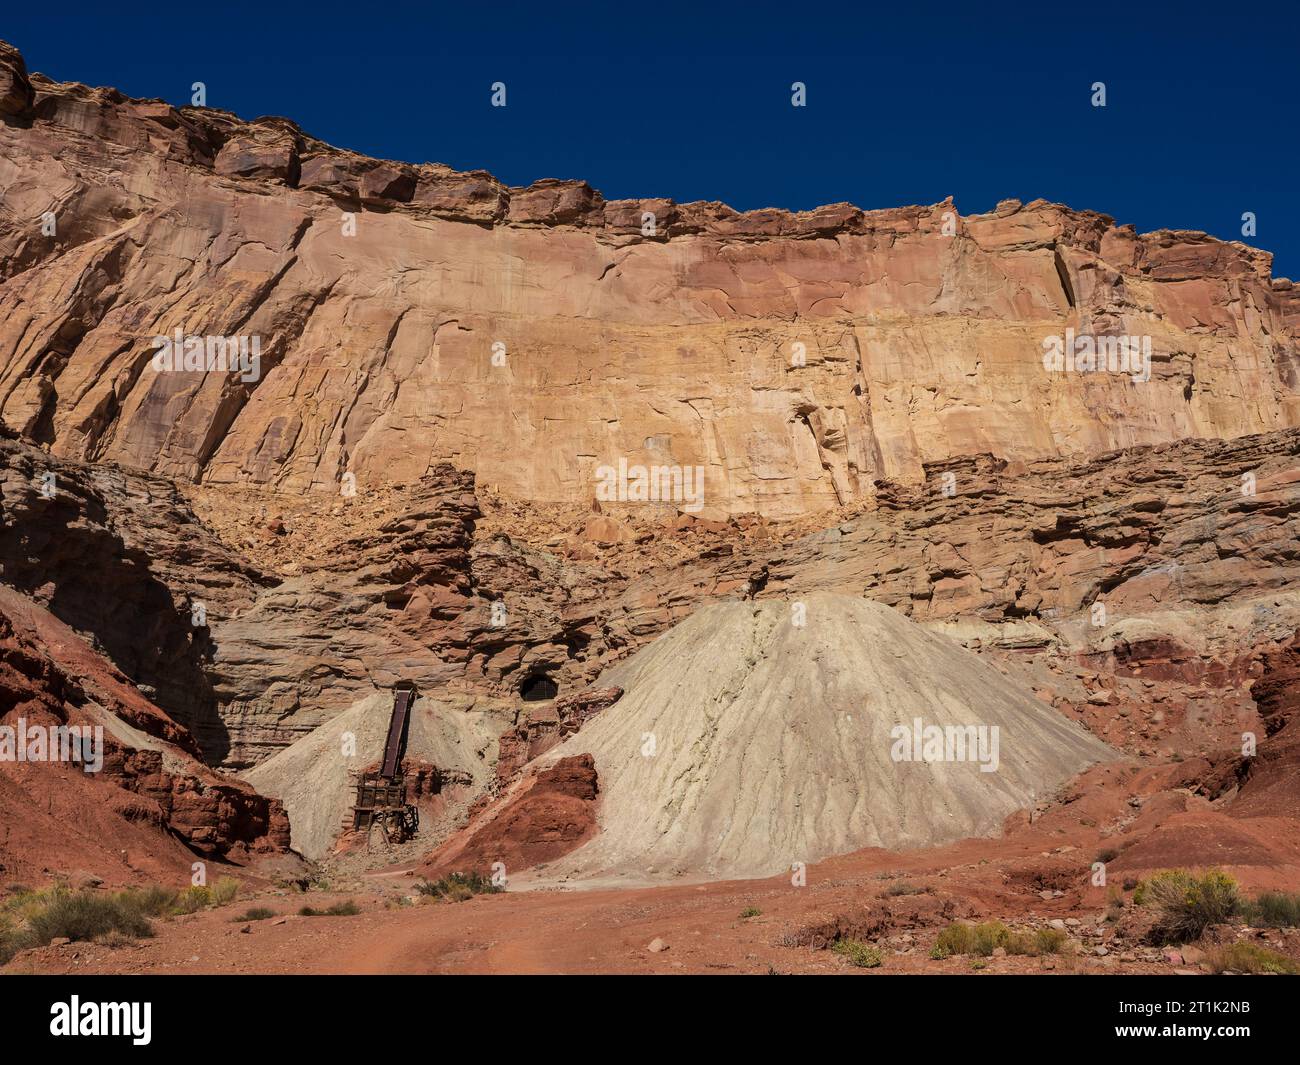 Remains of uranium mine, Tomsich Butte area off Reds Canyon Road. Stock Photo